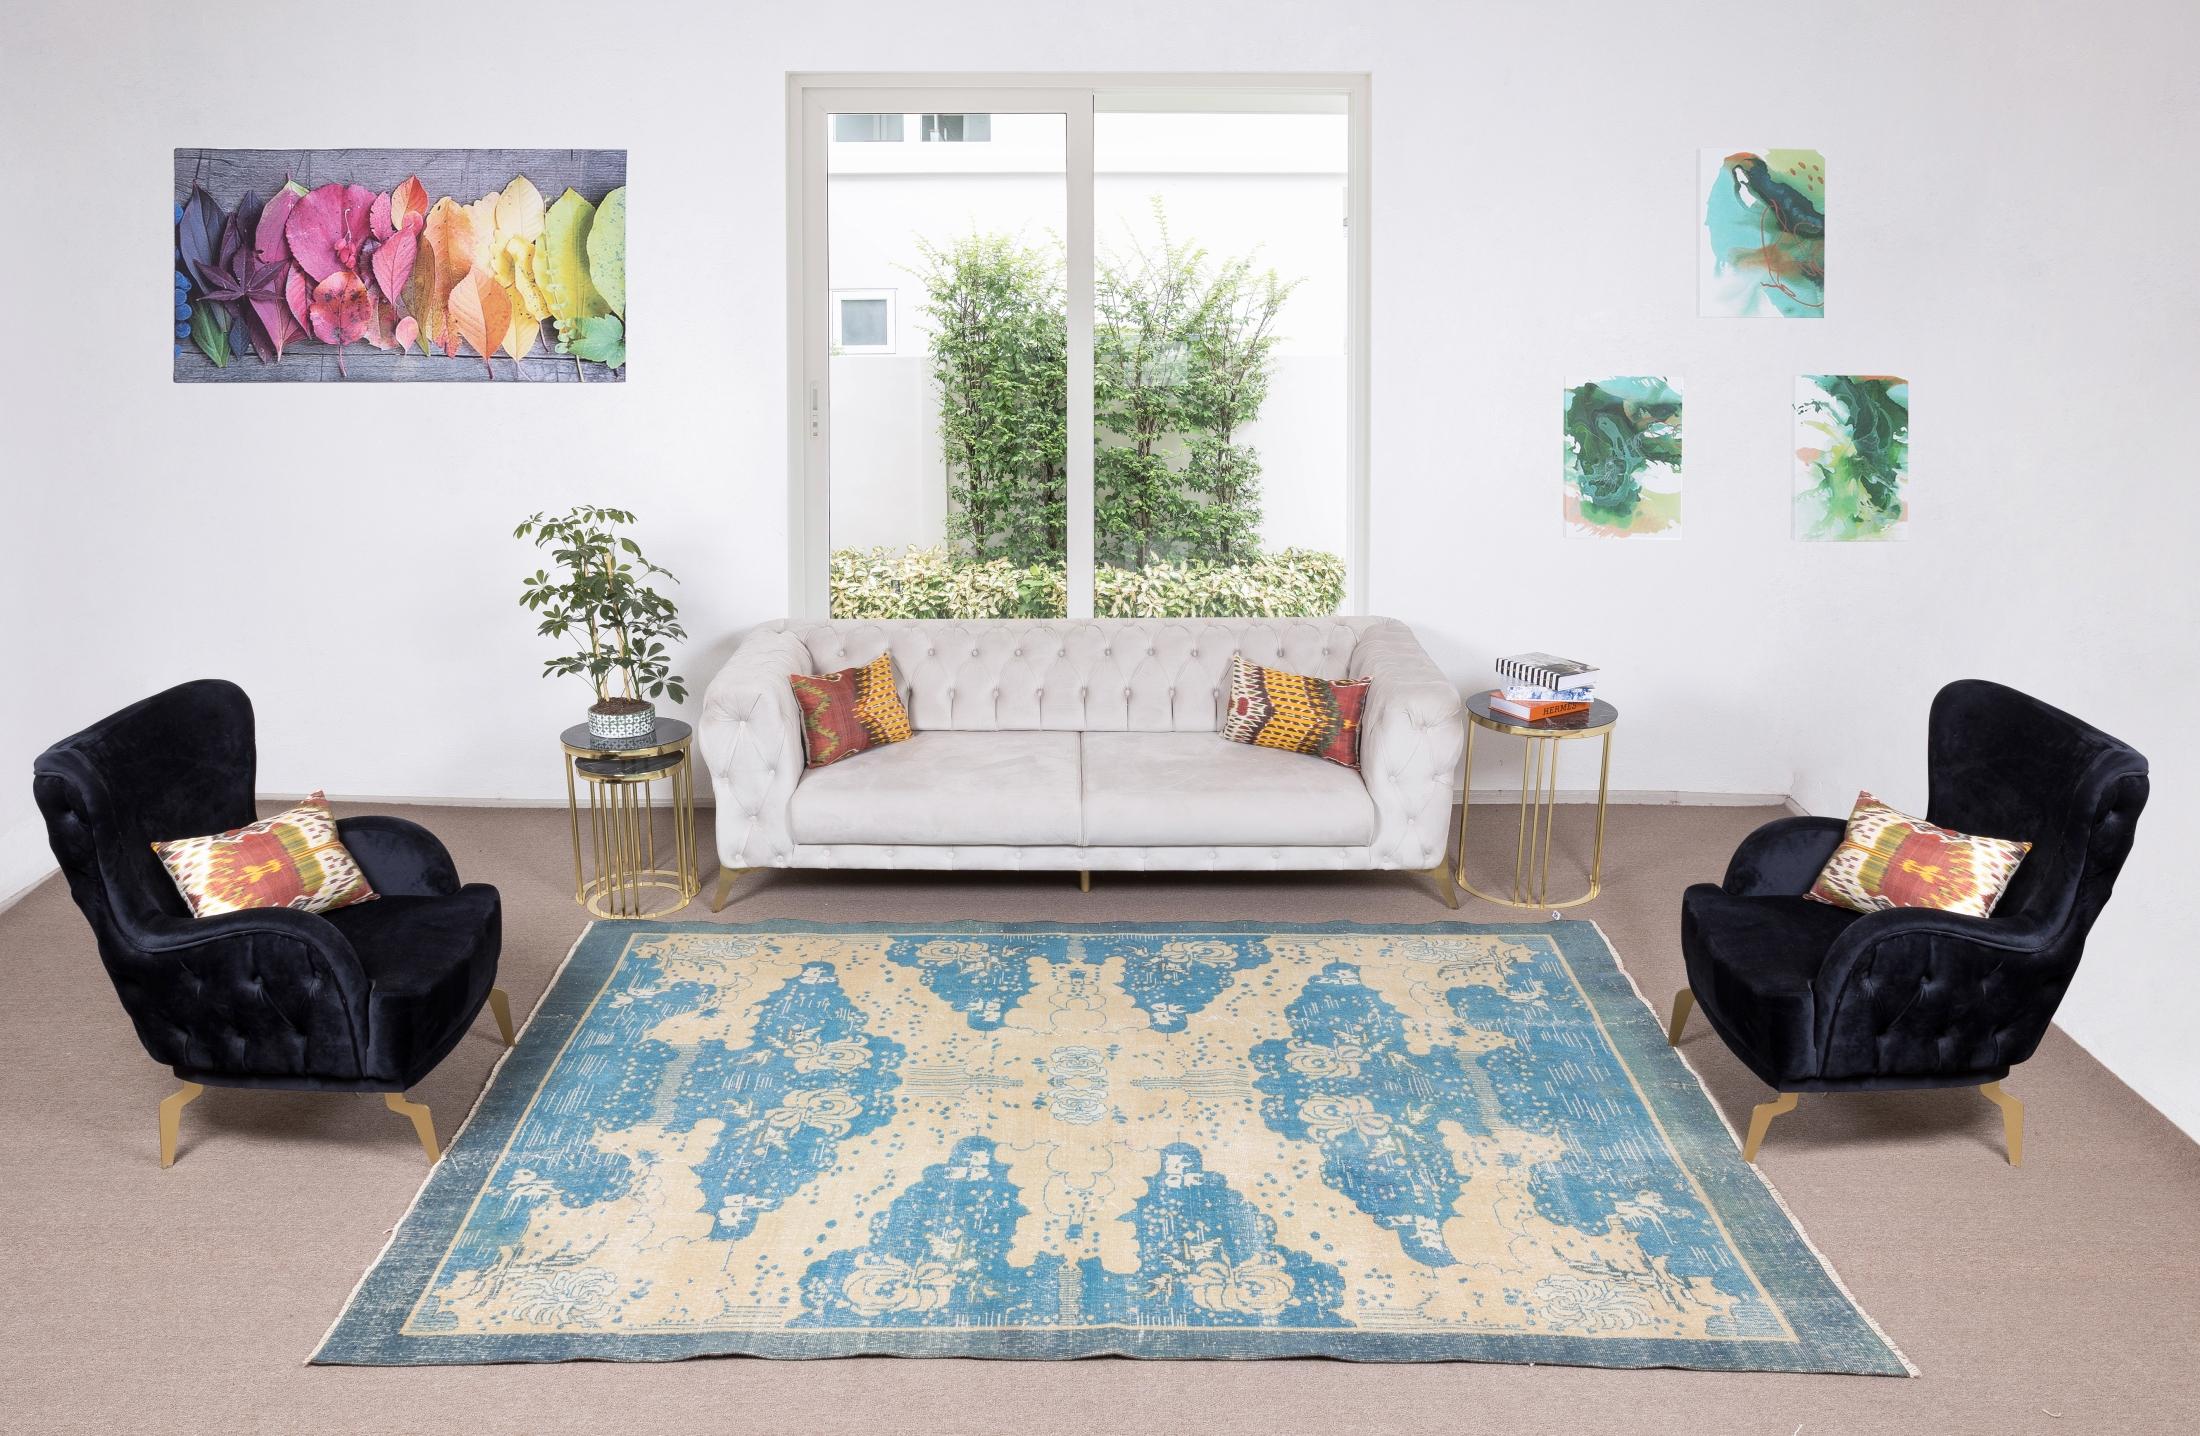 A finely hand-knotted vintage Turkish carpet from 1960s. The rug has even low wool pile on cotton foundation. It is heavy and lays flat on the floor, in very good condition with no issues. It has been washed professionally, The rug is sturdy and can